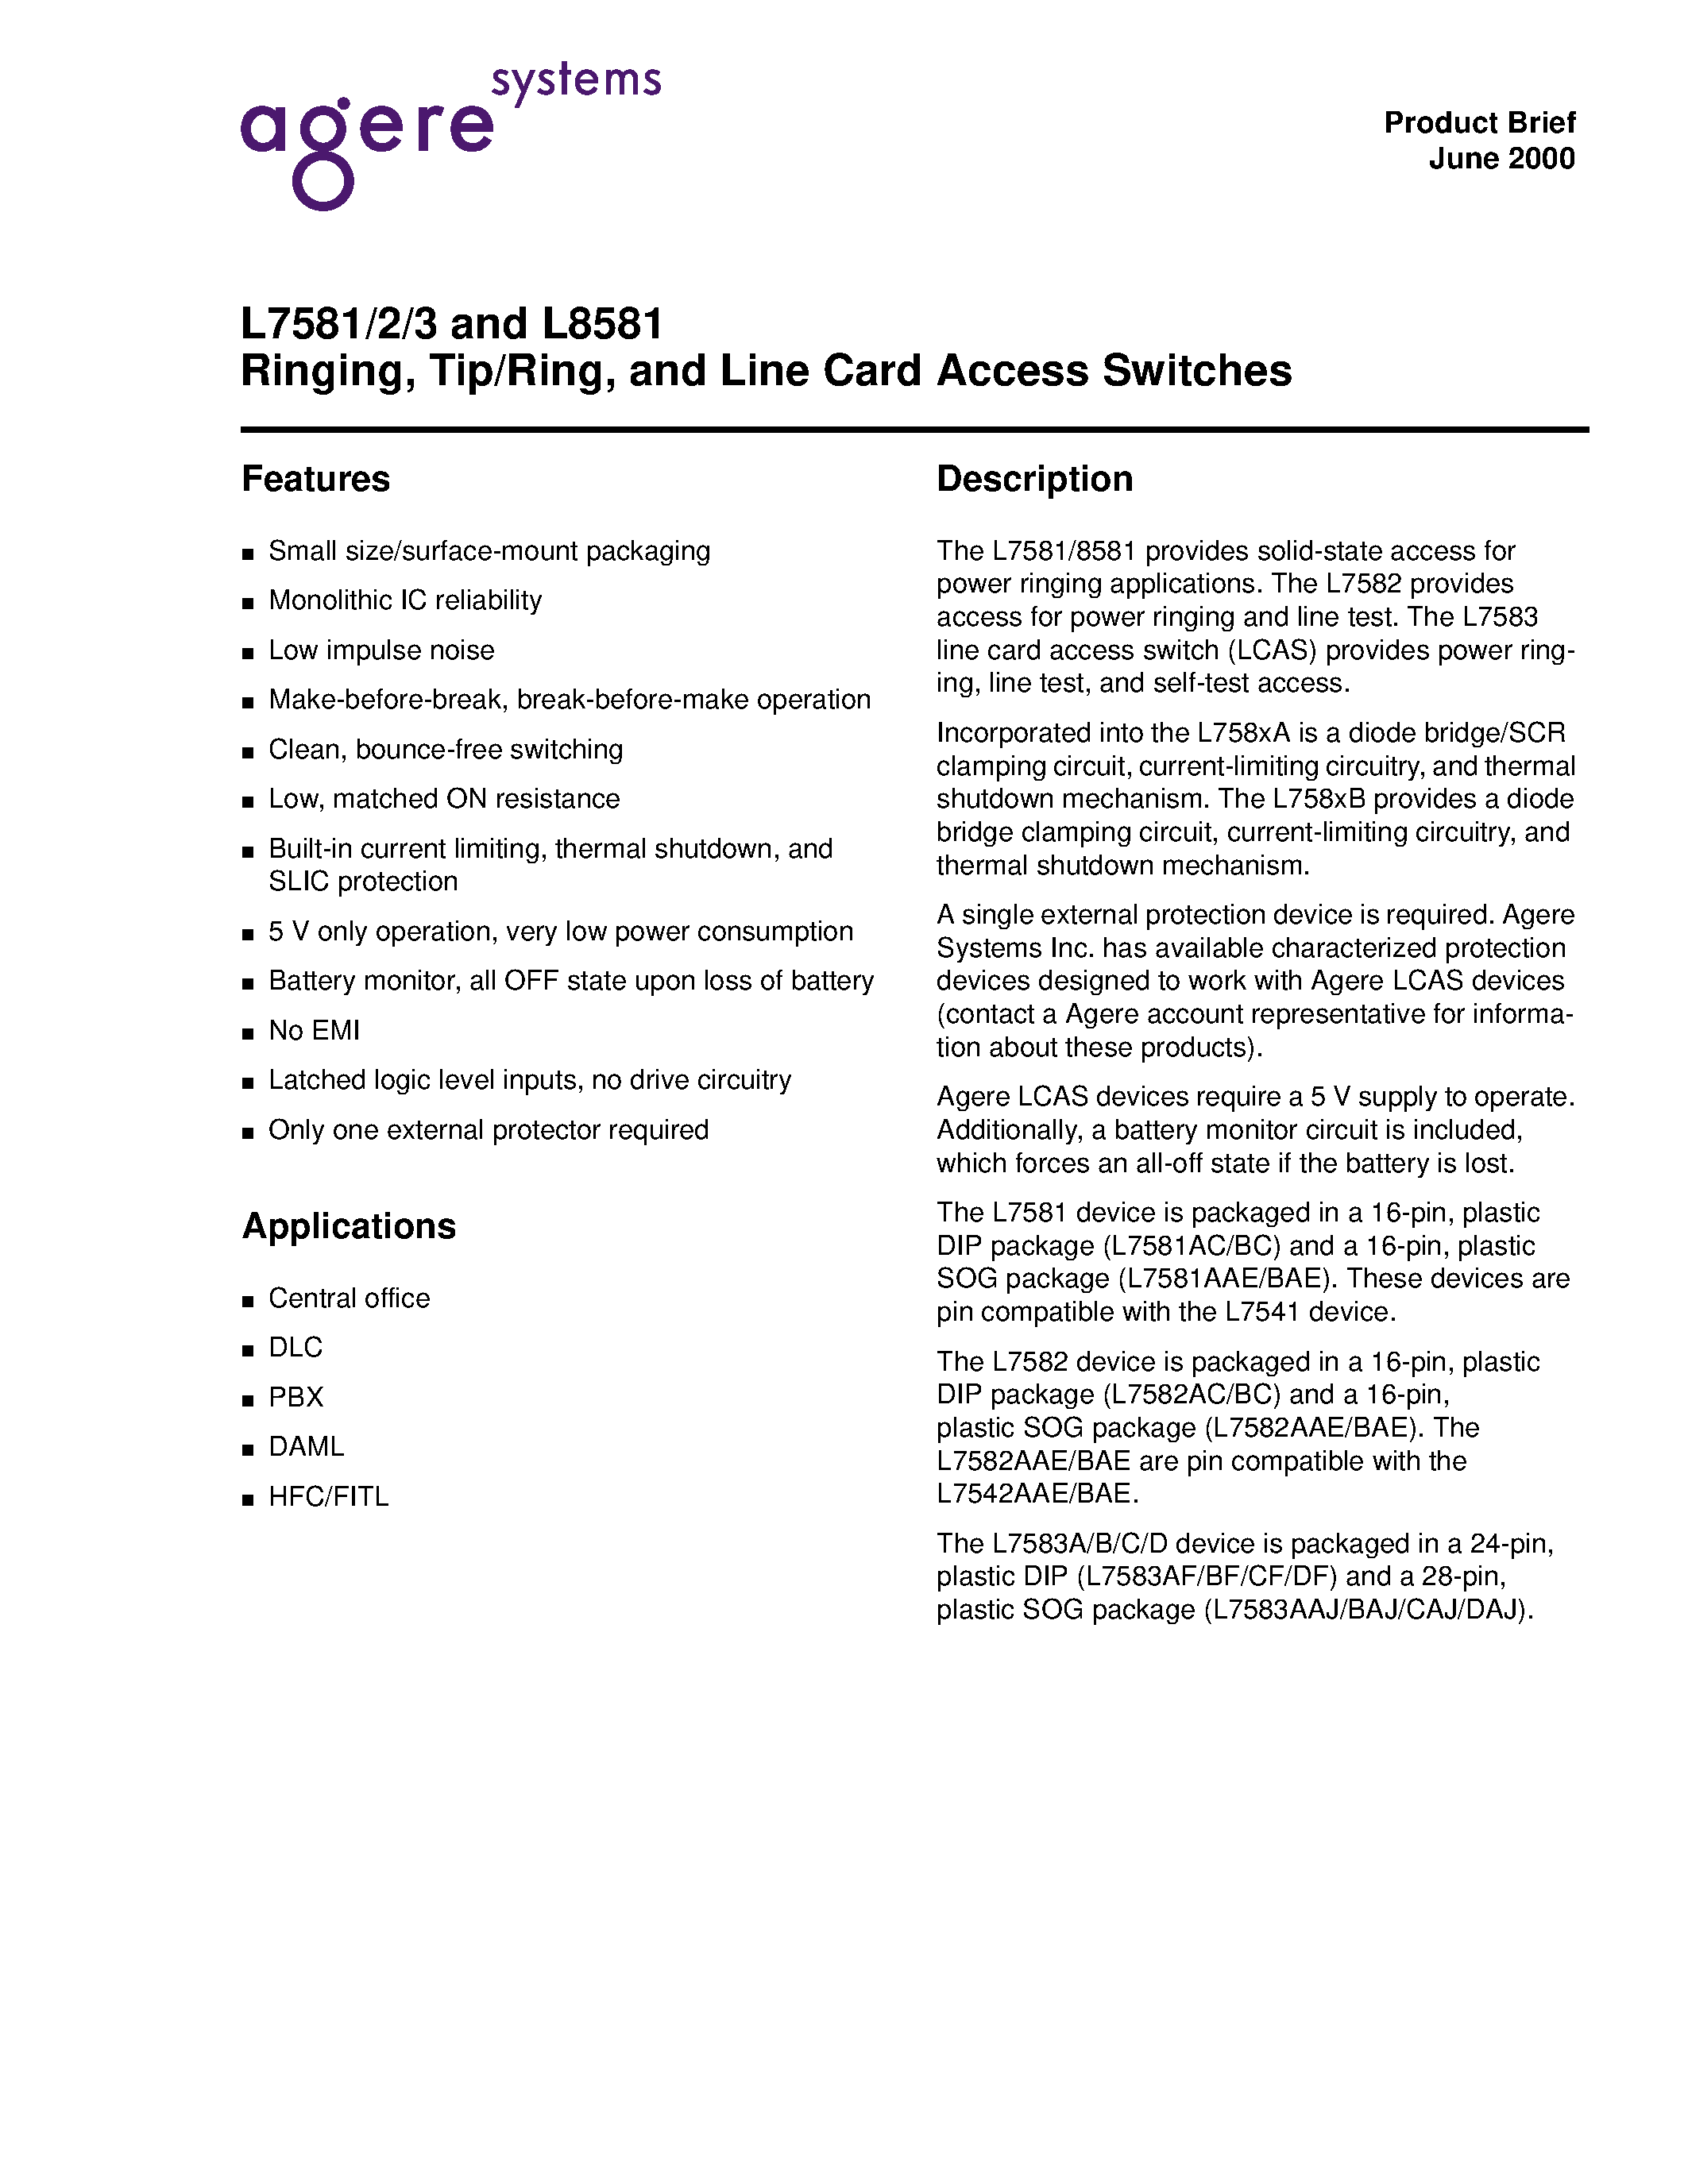 Даташит L7581 - Ringing / Tip/Ring and Line Card Access Switches страница 1